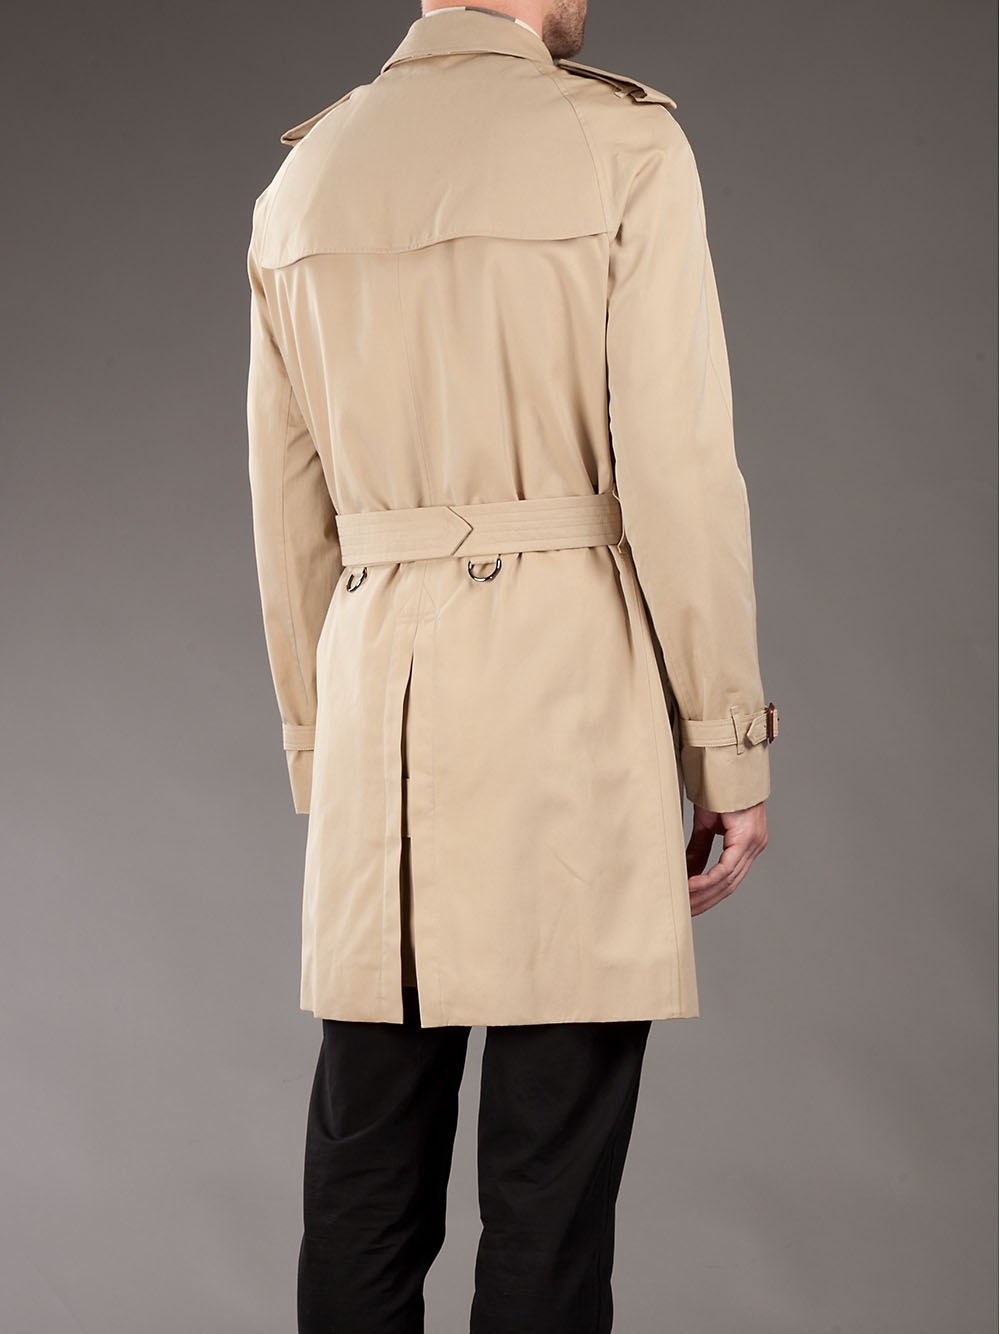 Burberry Trench Coat in Natural for Men - Lyst